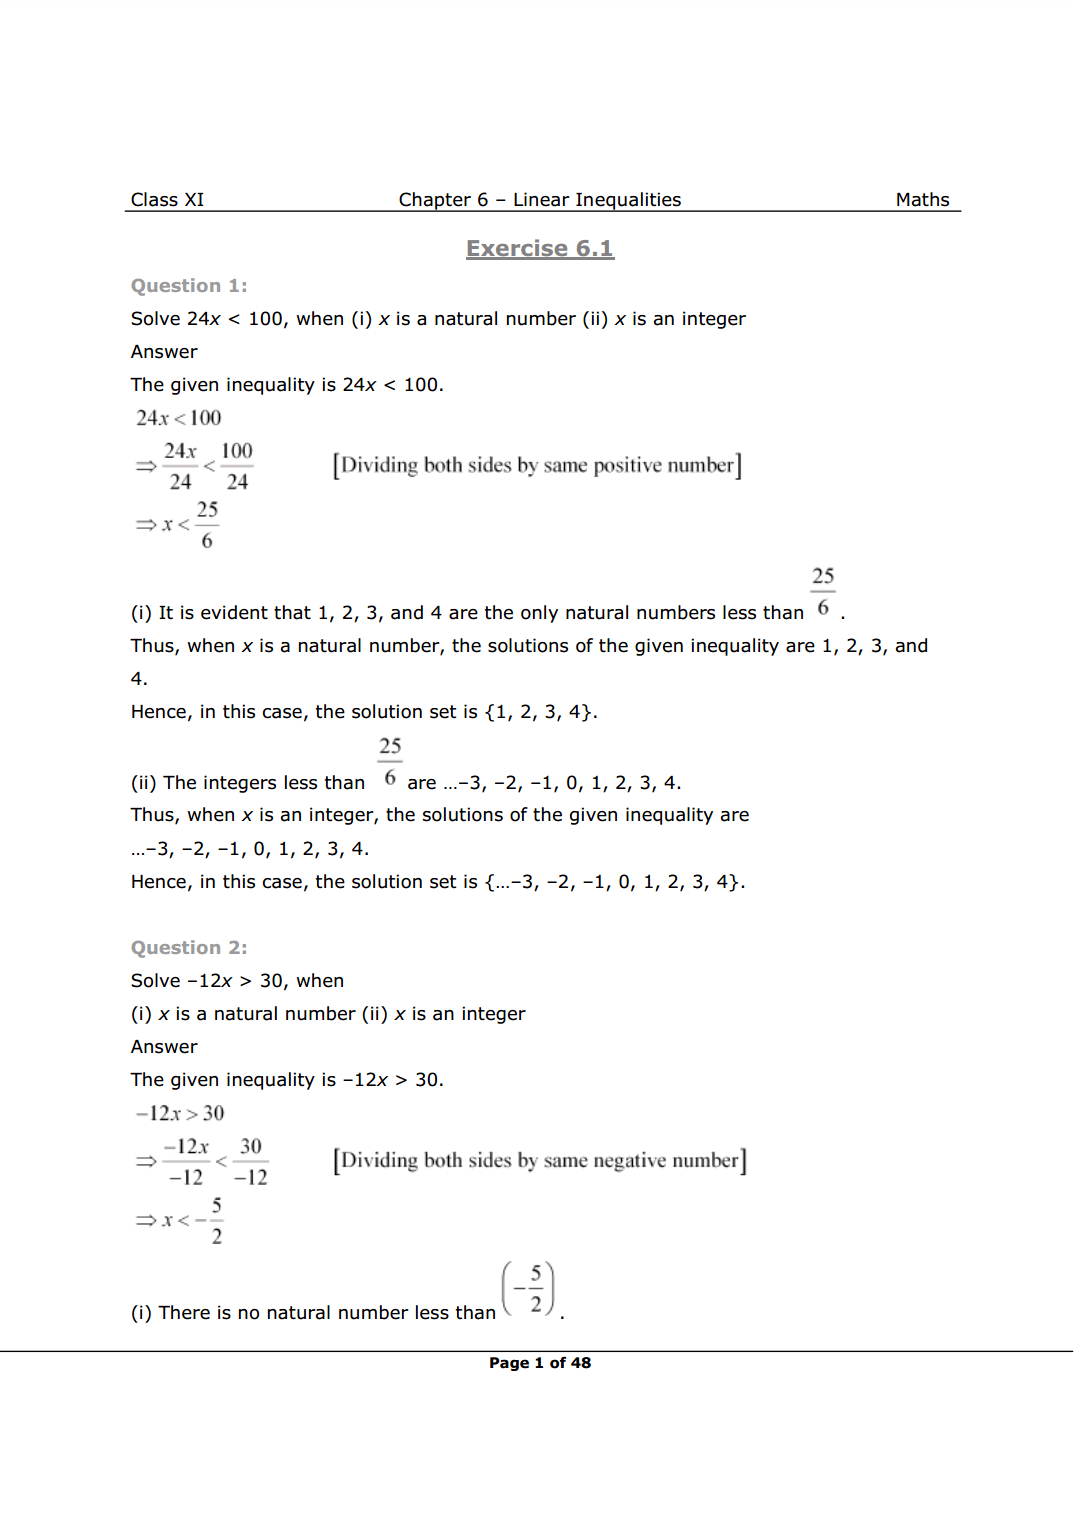 Class 11 Maths Chapter 6 Exercise 6.1 Solutions Image 1